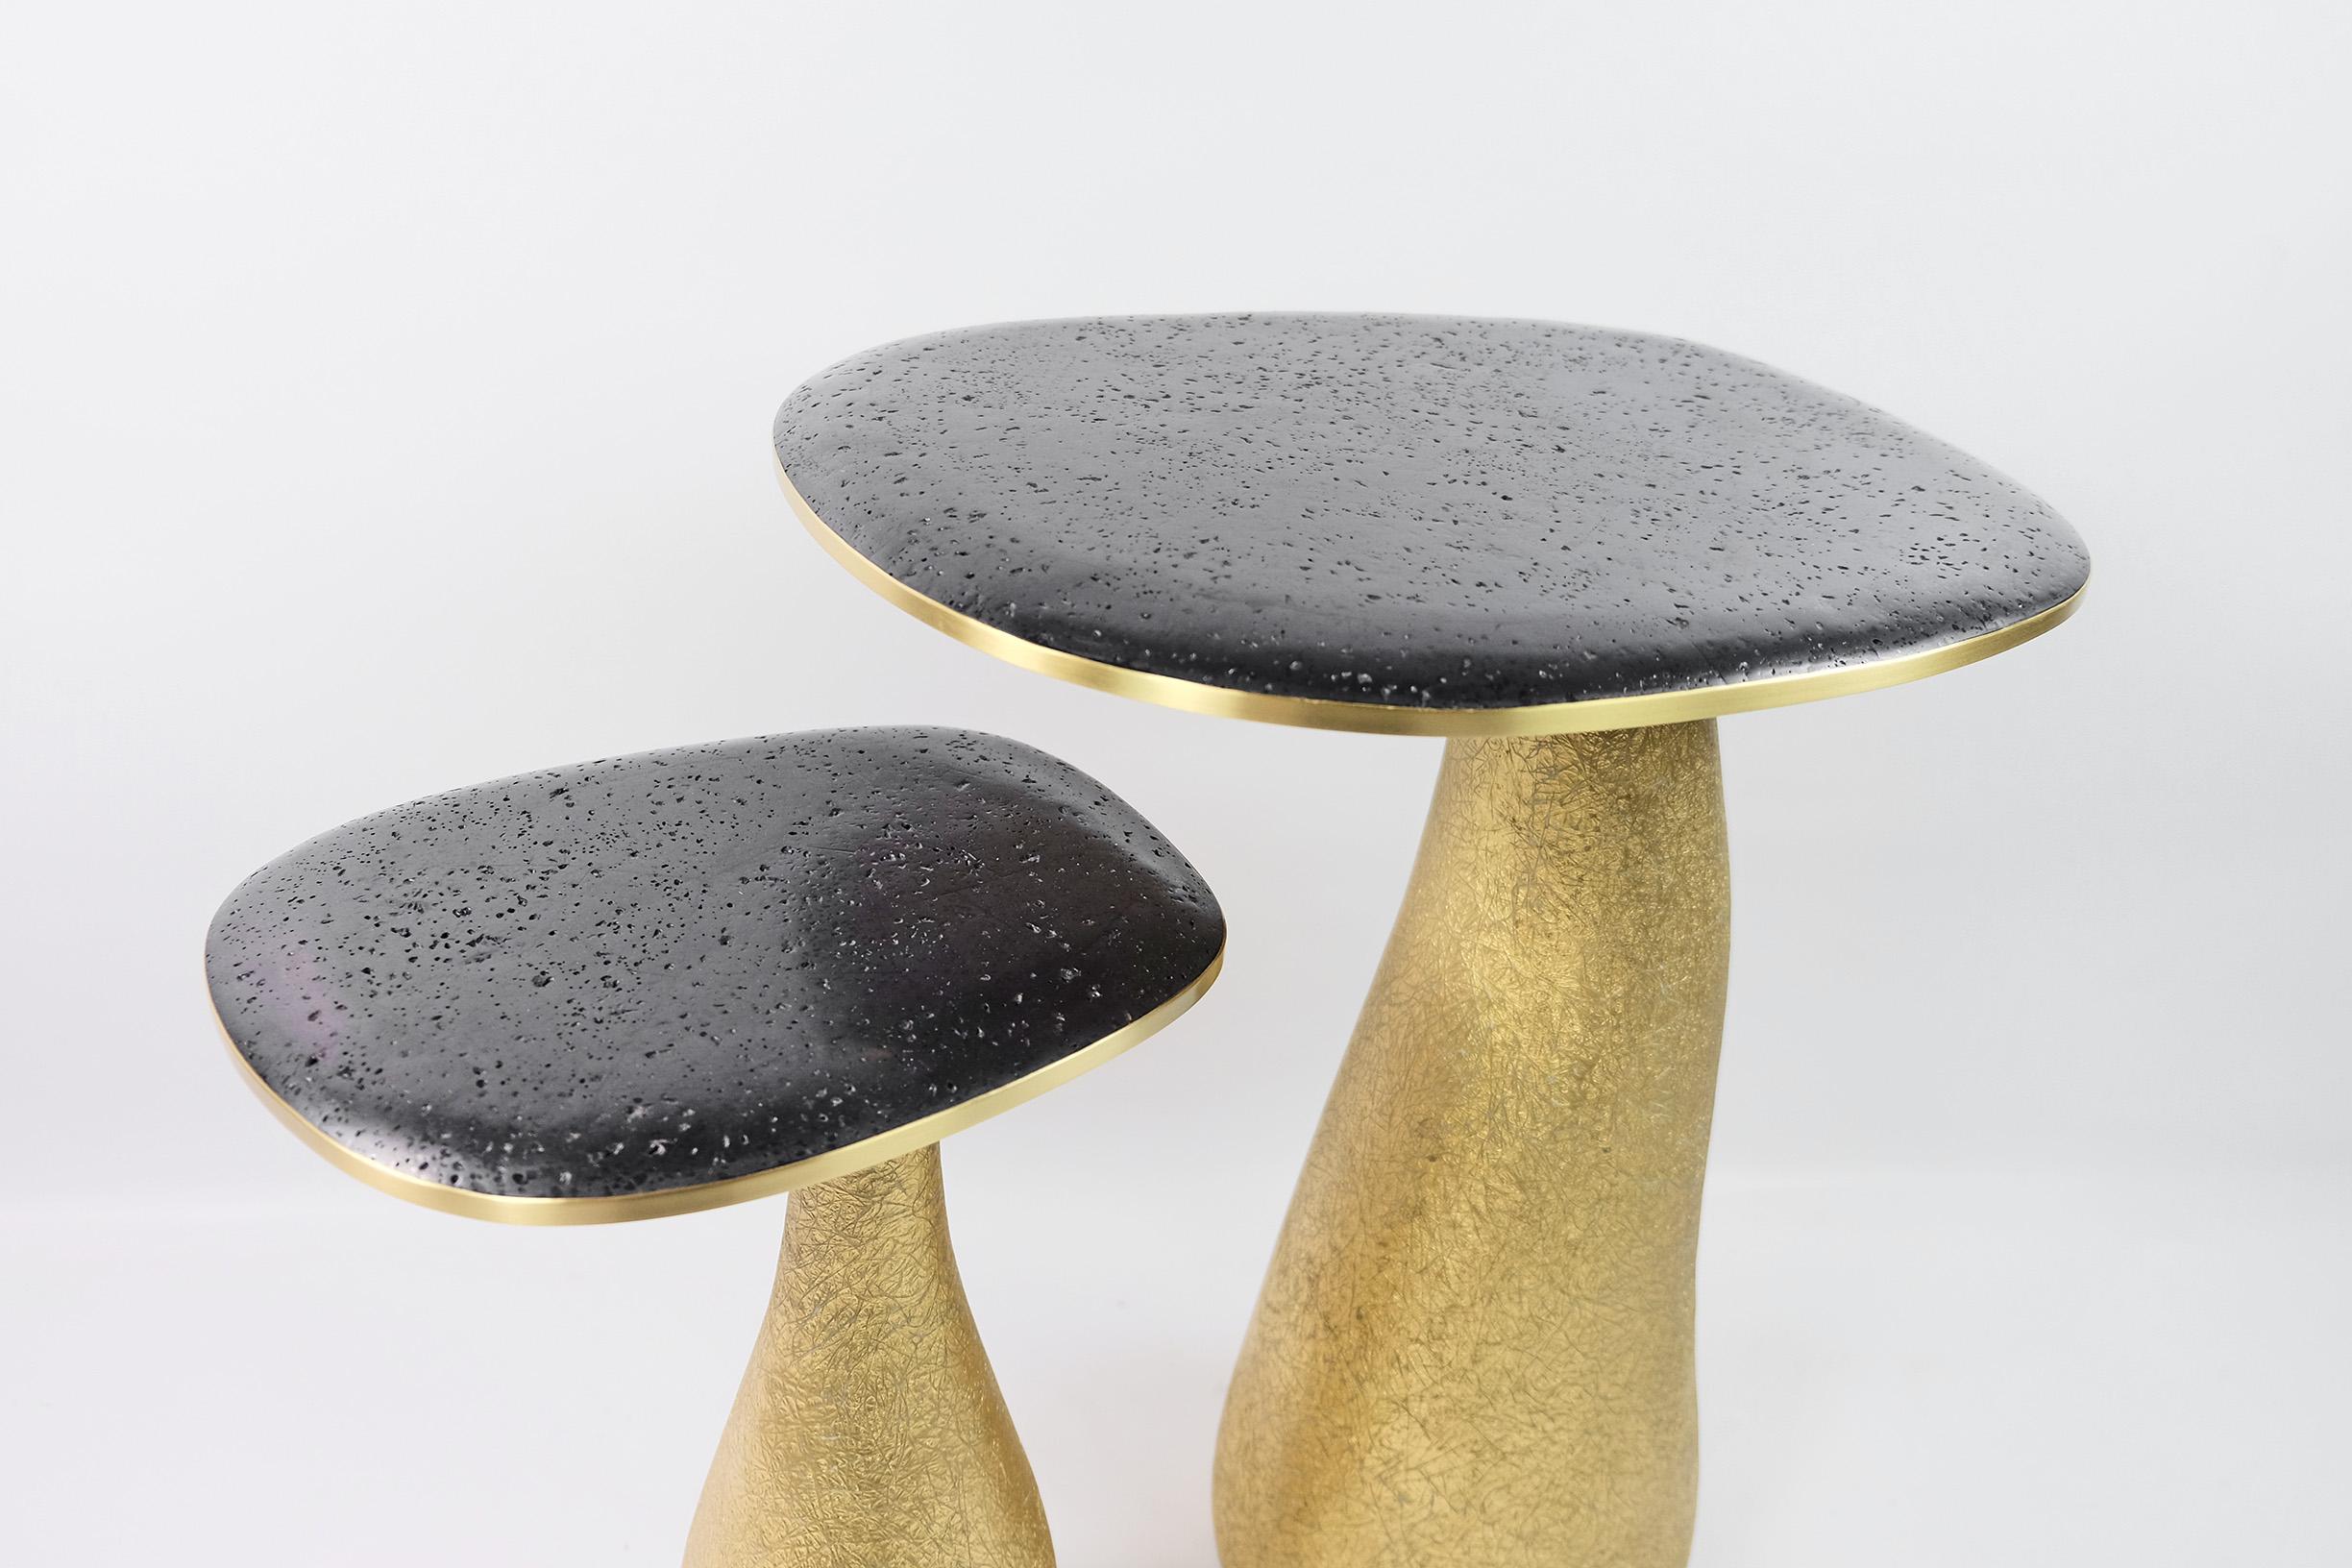 Contemporary Set of Two Side Tables in Lava Stone with a Gilded Base